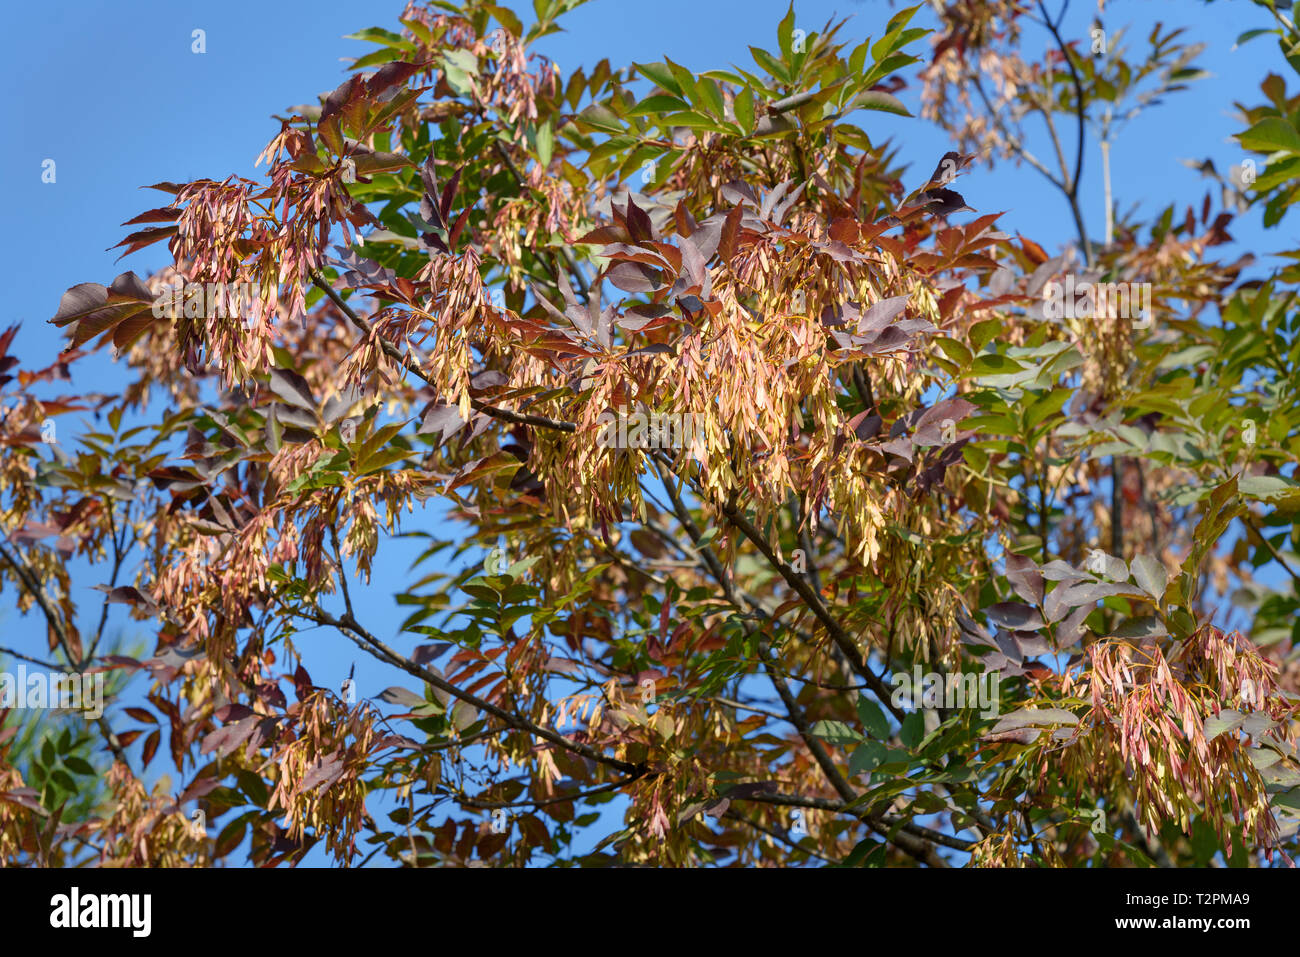 European ash or Fraxinus excelsior with seeds in the autumn. Genoa, Italy Stock Photo